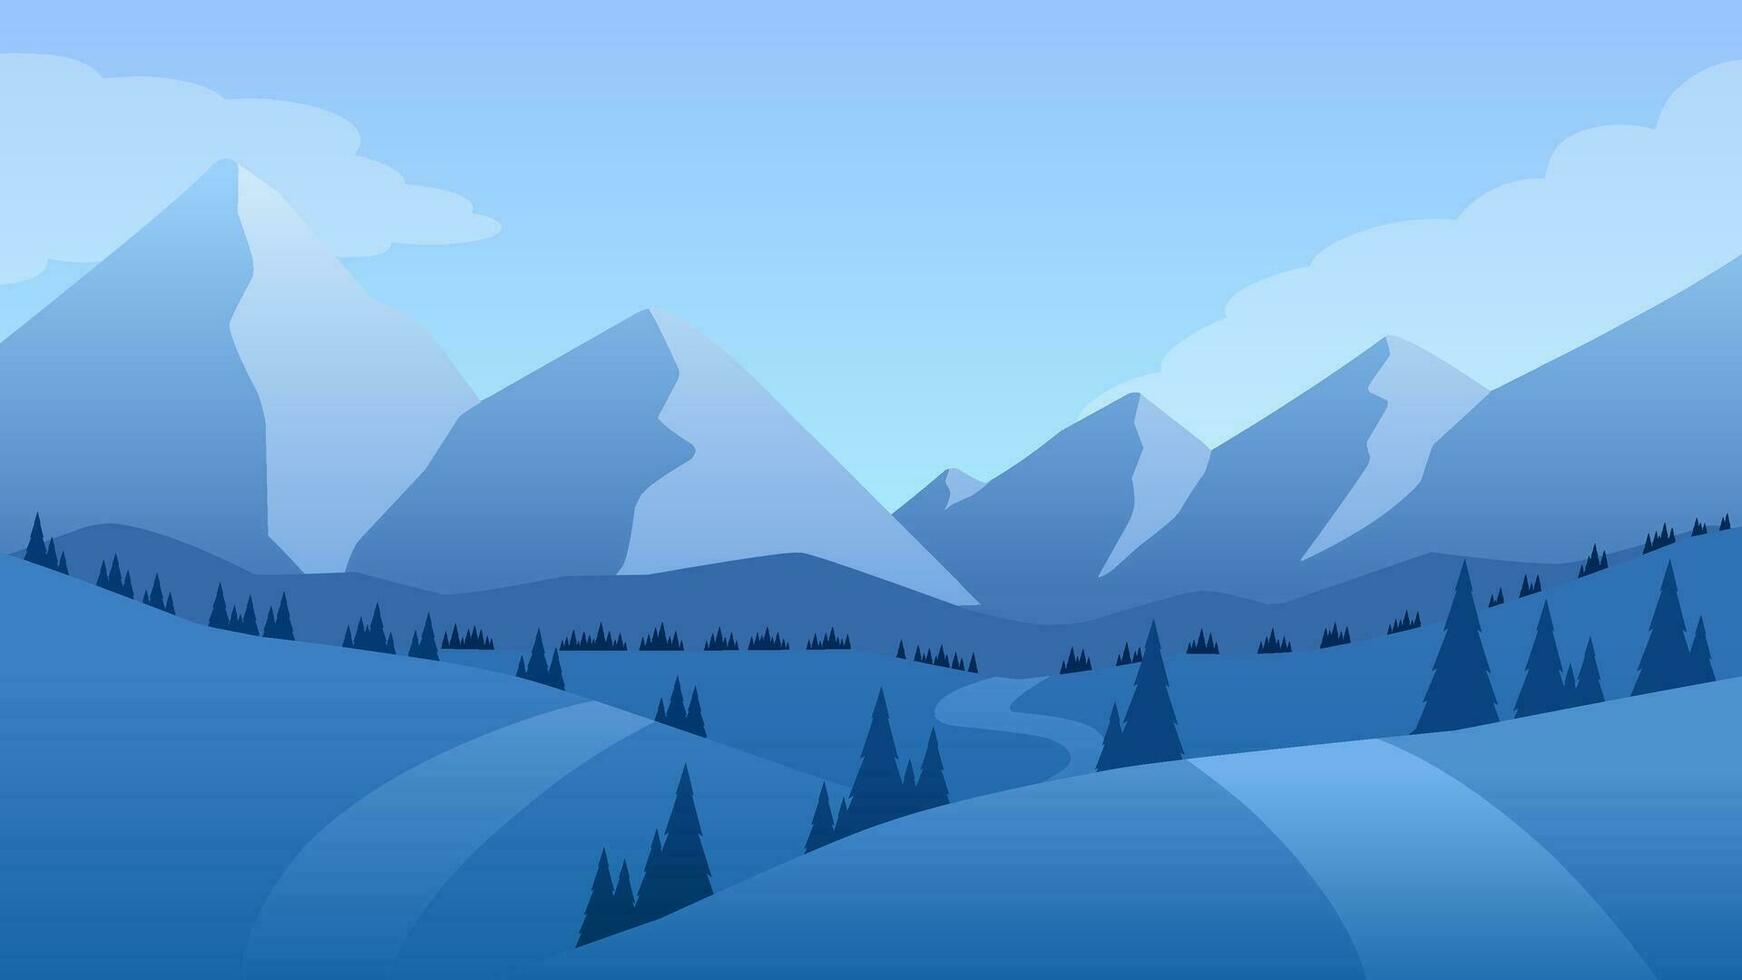 Snowy mountain landscape vector illustration. Scenery of  path to the mountain in the cold season. Winter mountain landscape for background, wallpaper or illustration